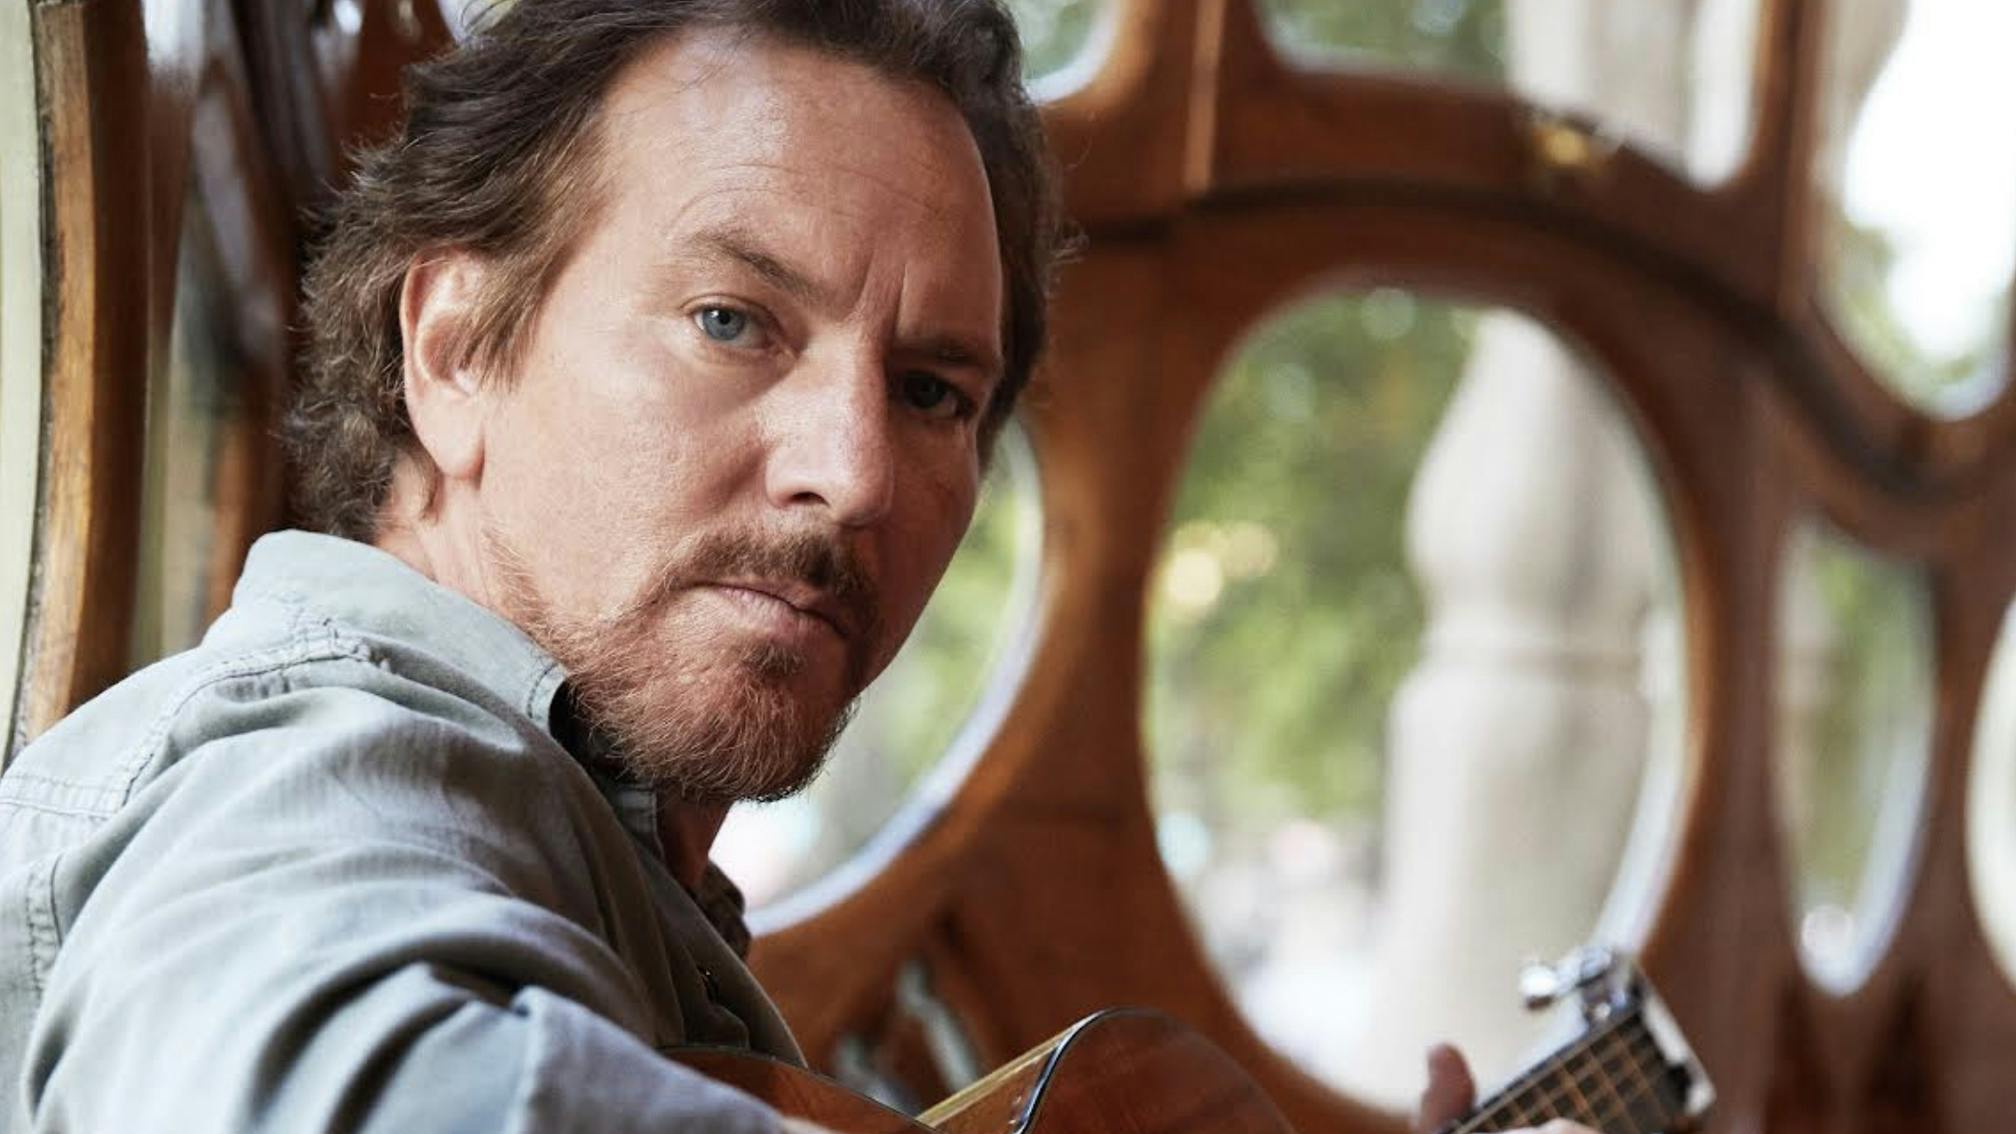 Pearl Jam's Eddie Vedder shares new single, Long Way, from upcoming solo album Earthling